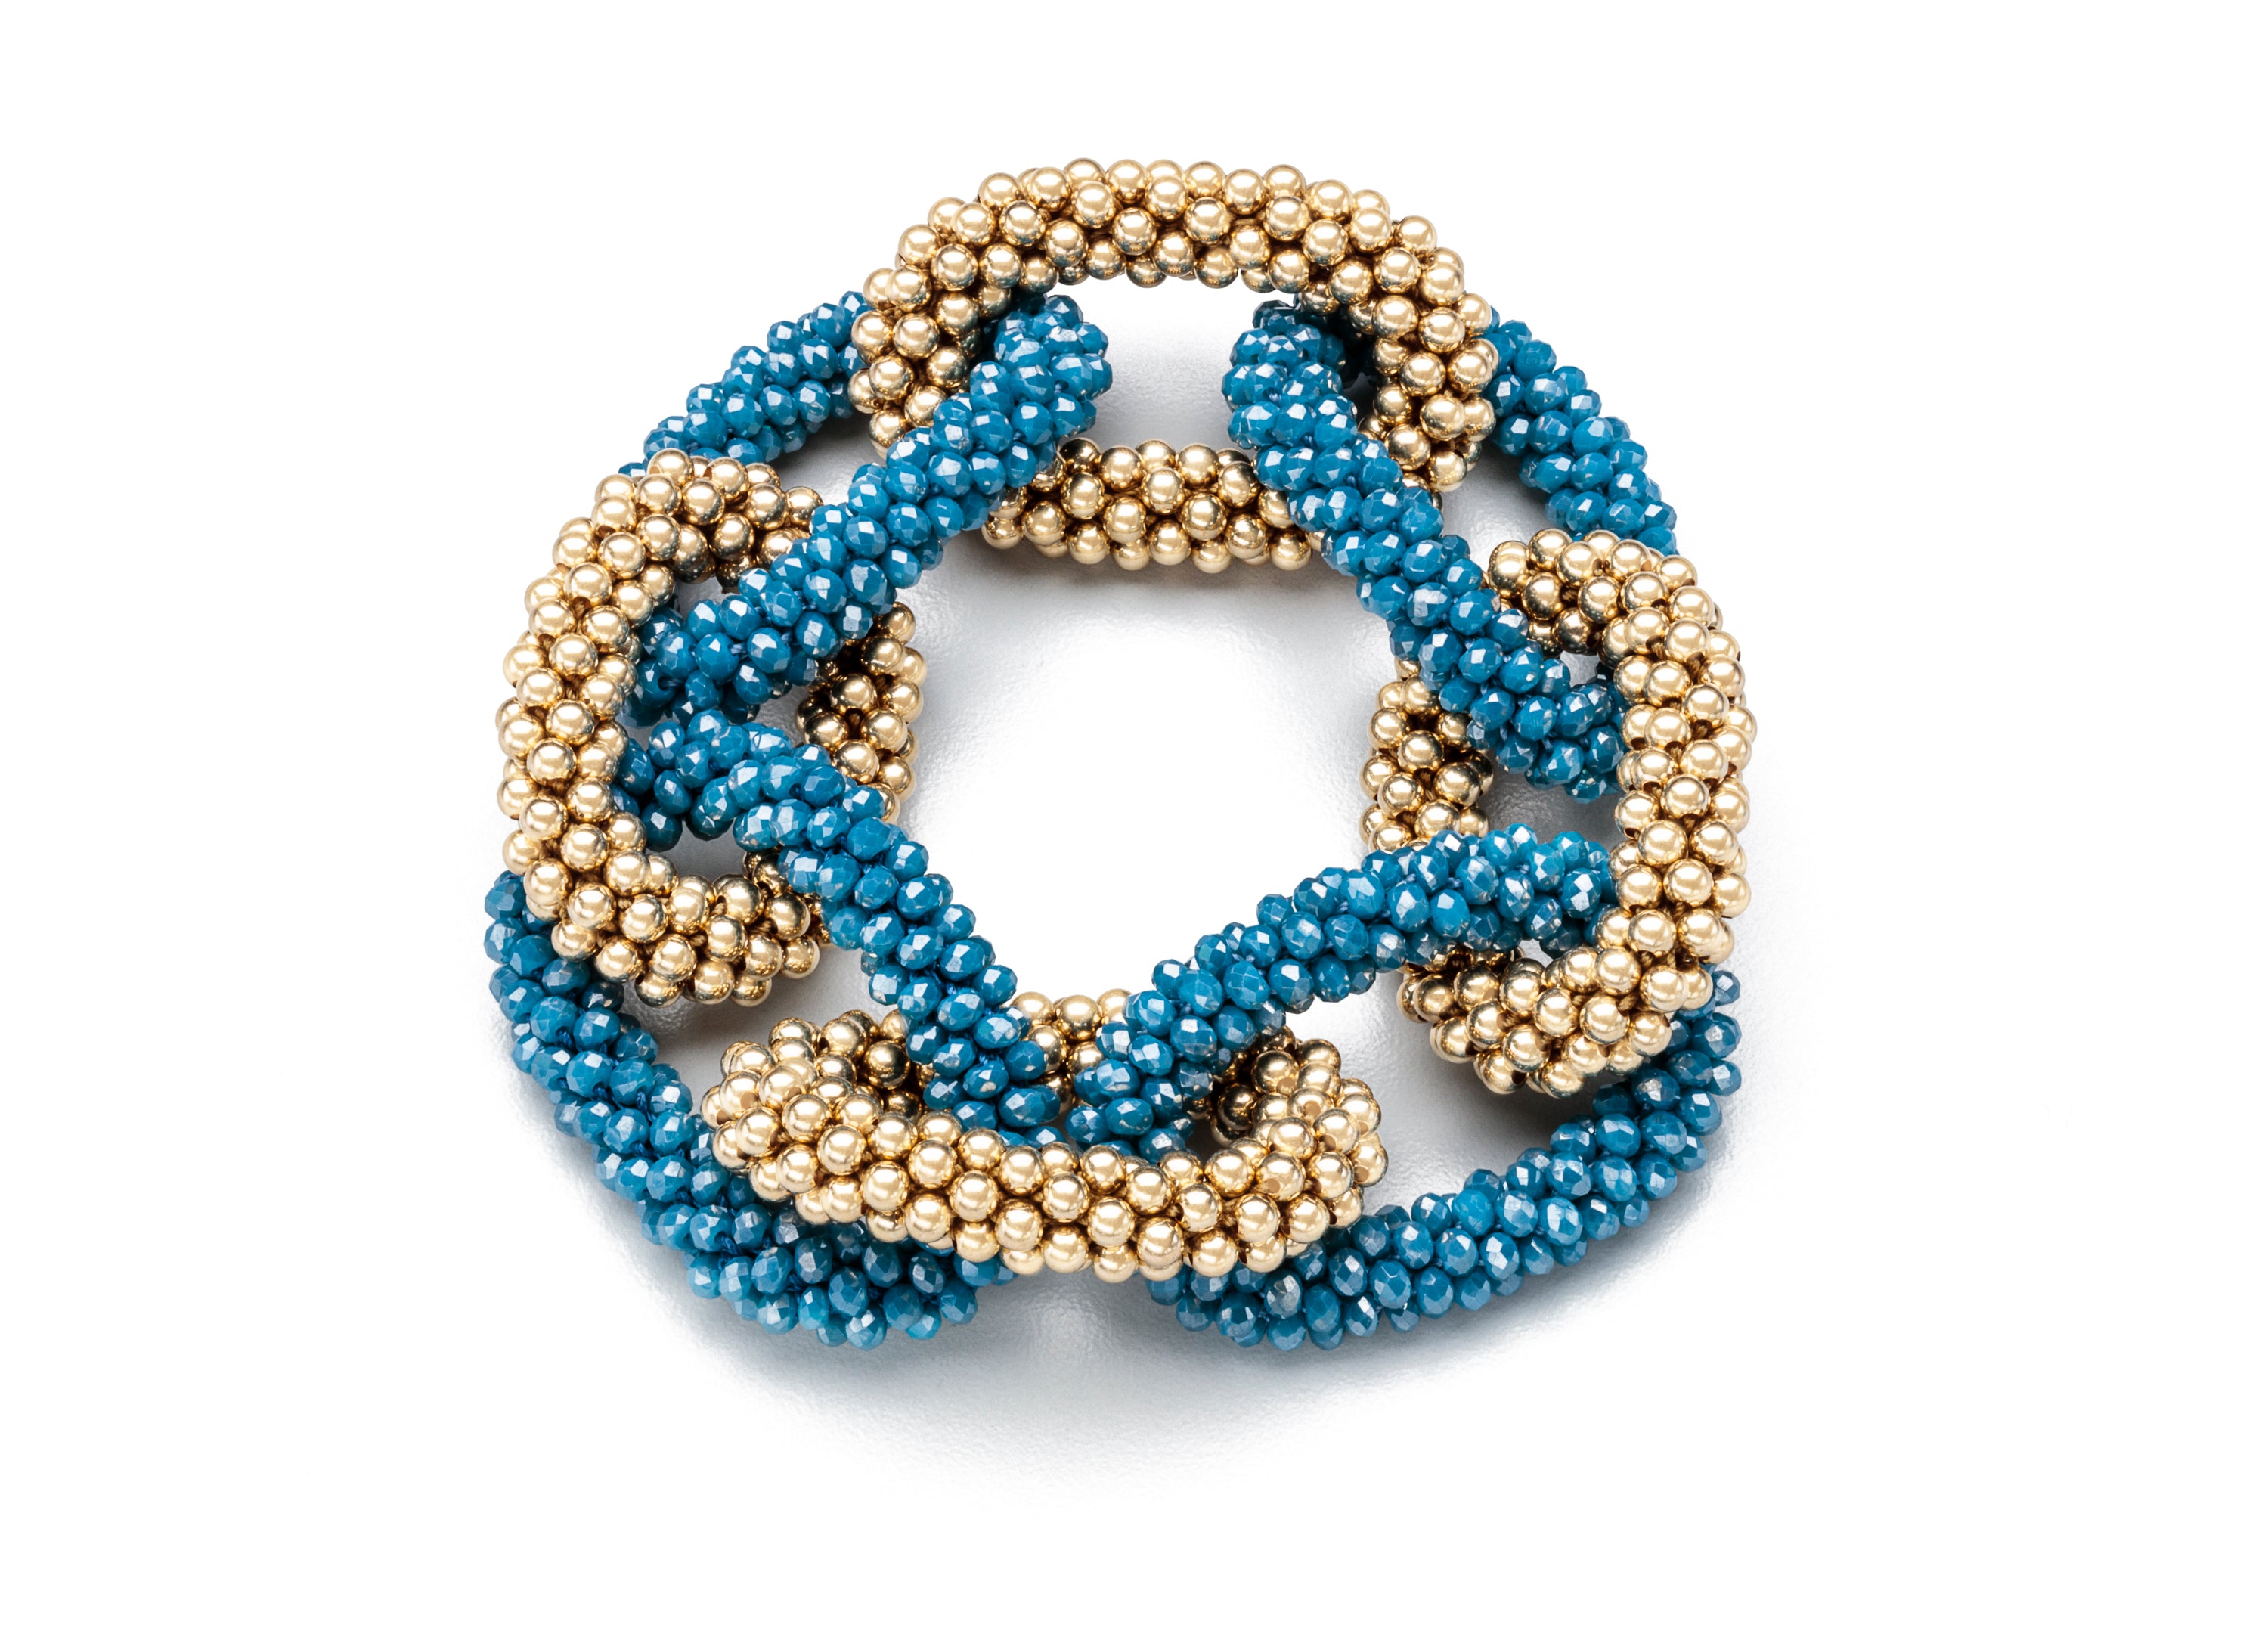 Linkable Bracelets, Gold and Semiprecious (Click to View All)